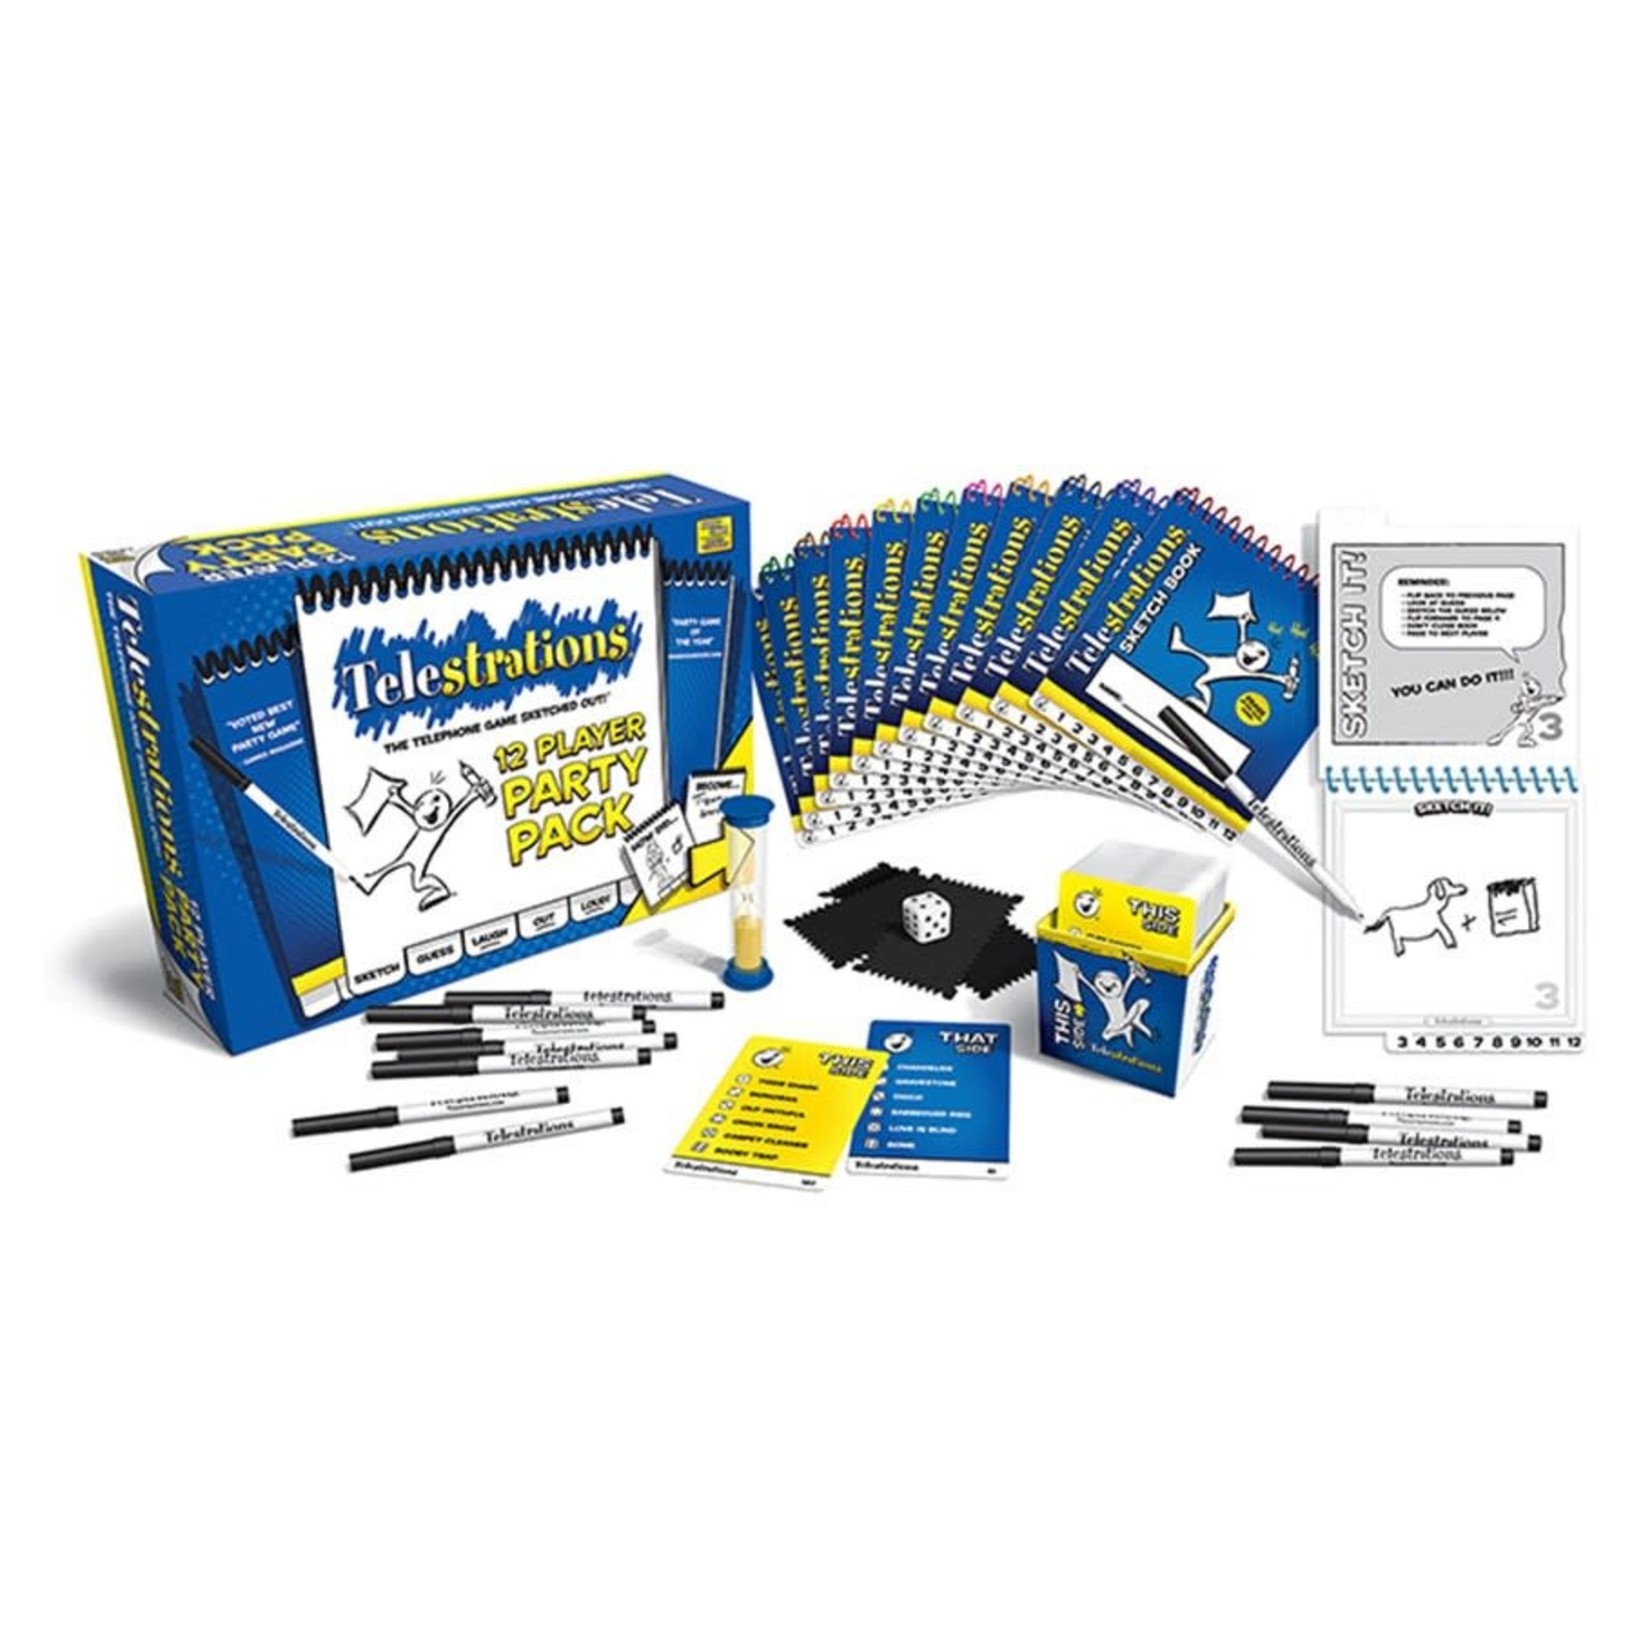 The OP-USAopoly Telestrations 12 Player Party Pack